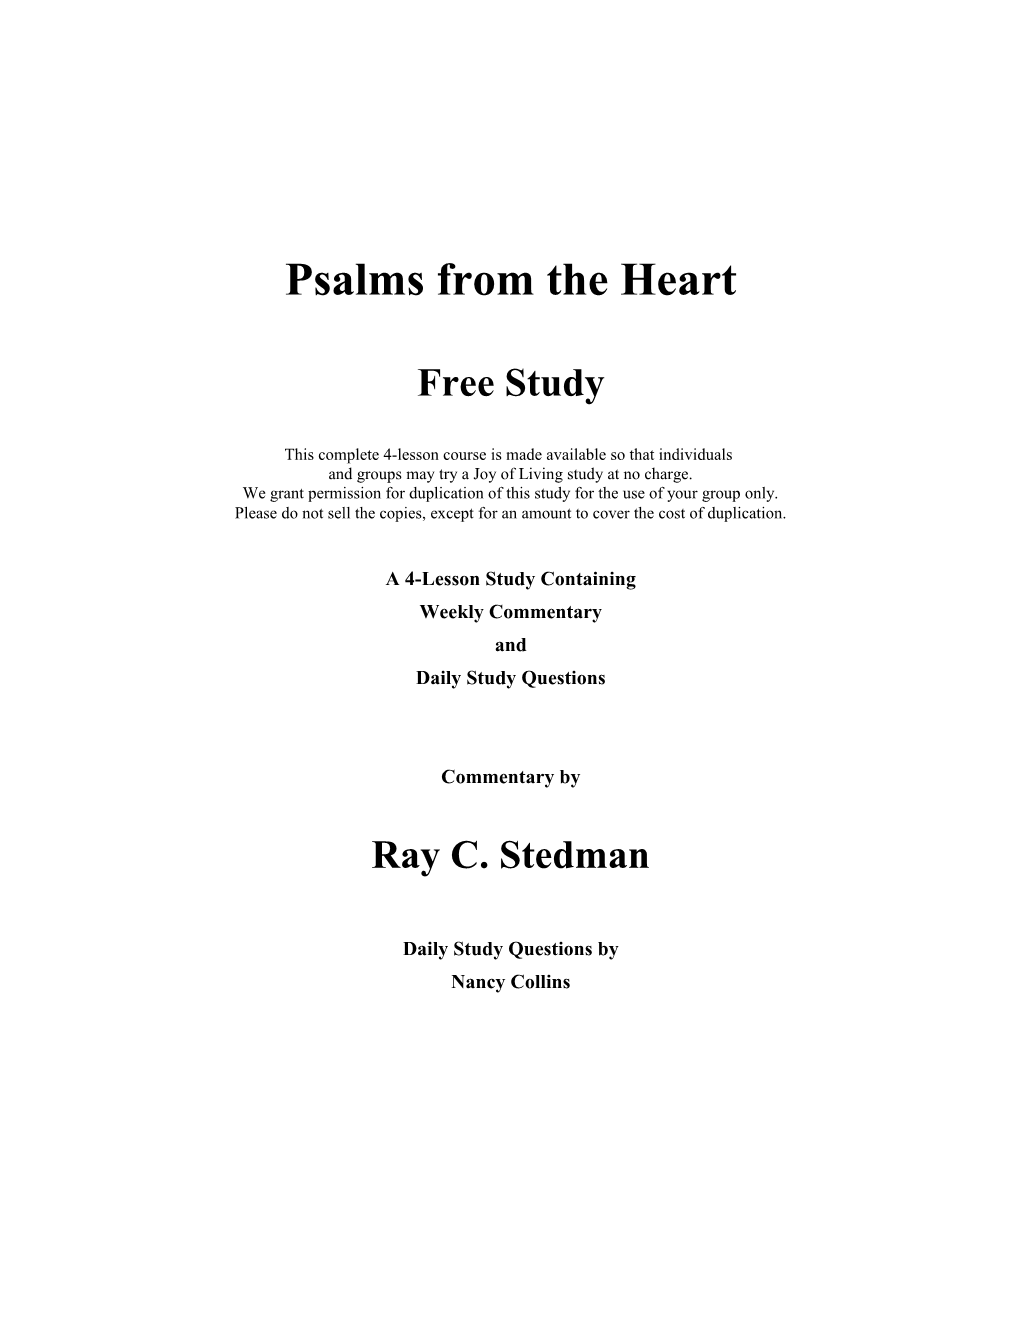 Joy of Living Bible Studies Psalms from the Heart 1